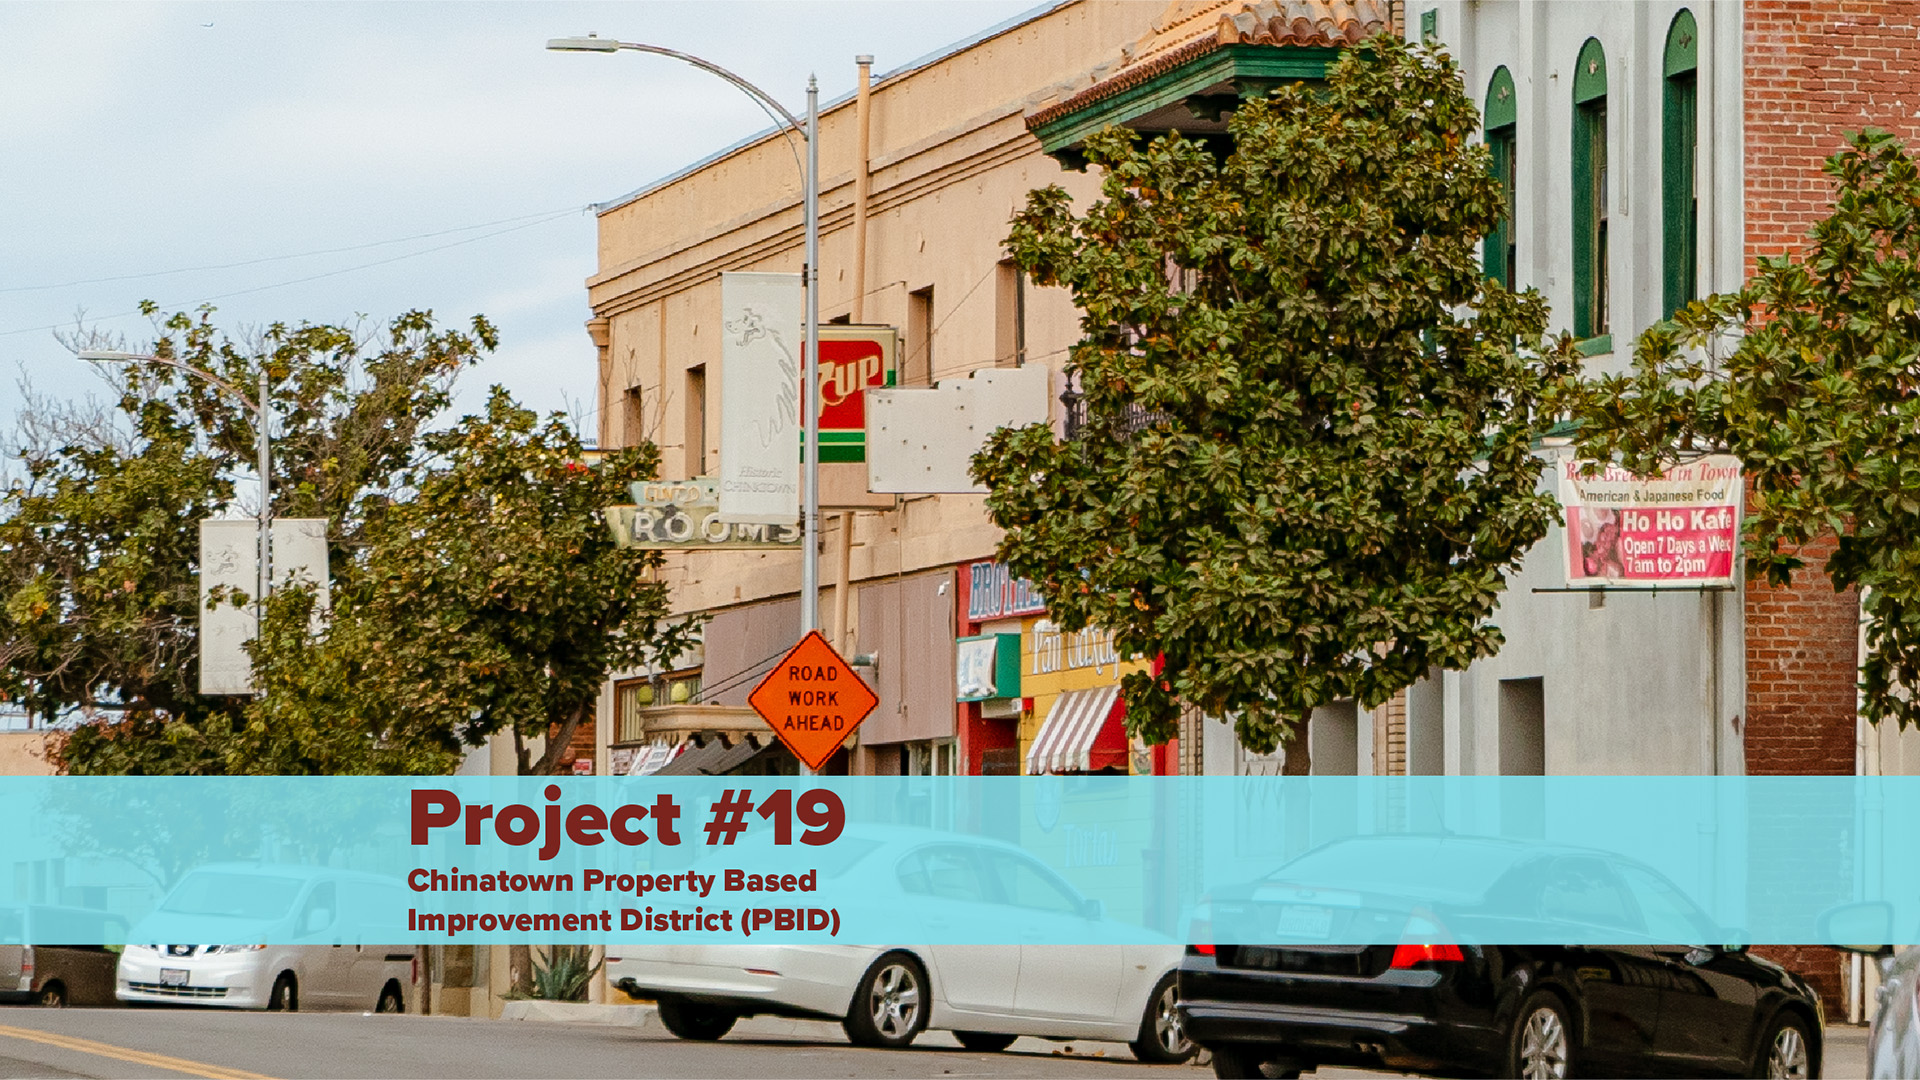 Project #19: Chinatown Property Based Improvement District (PBID)